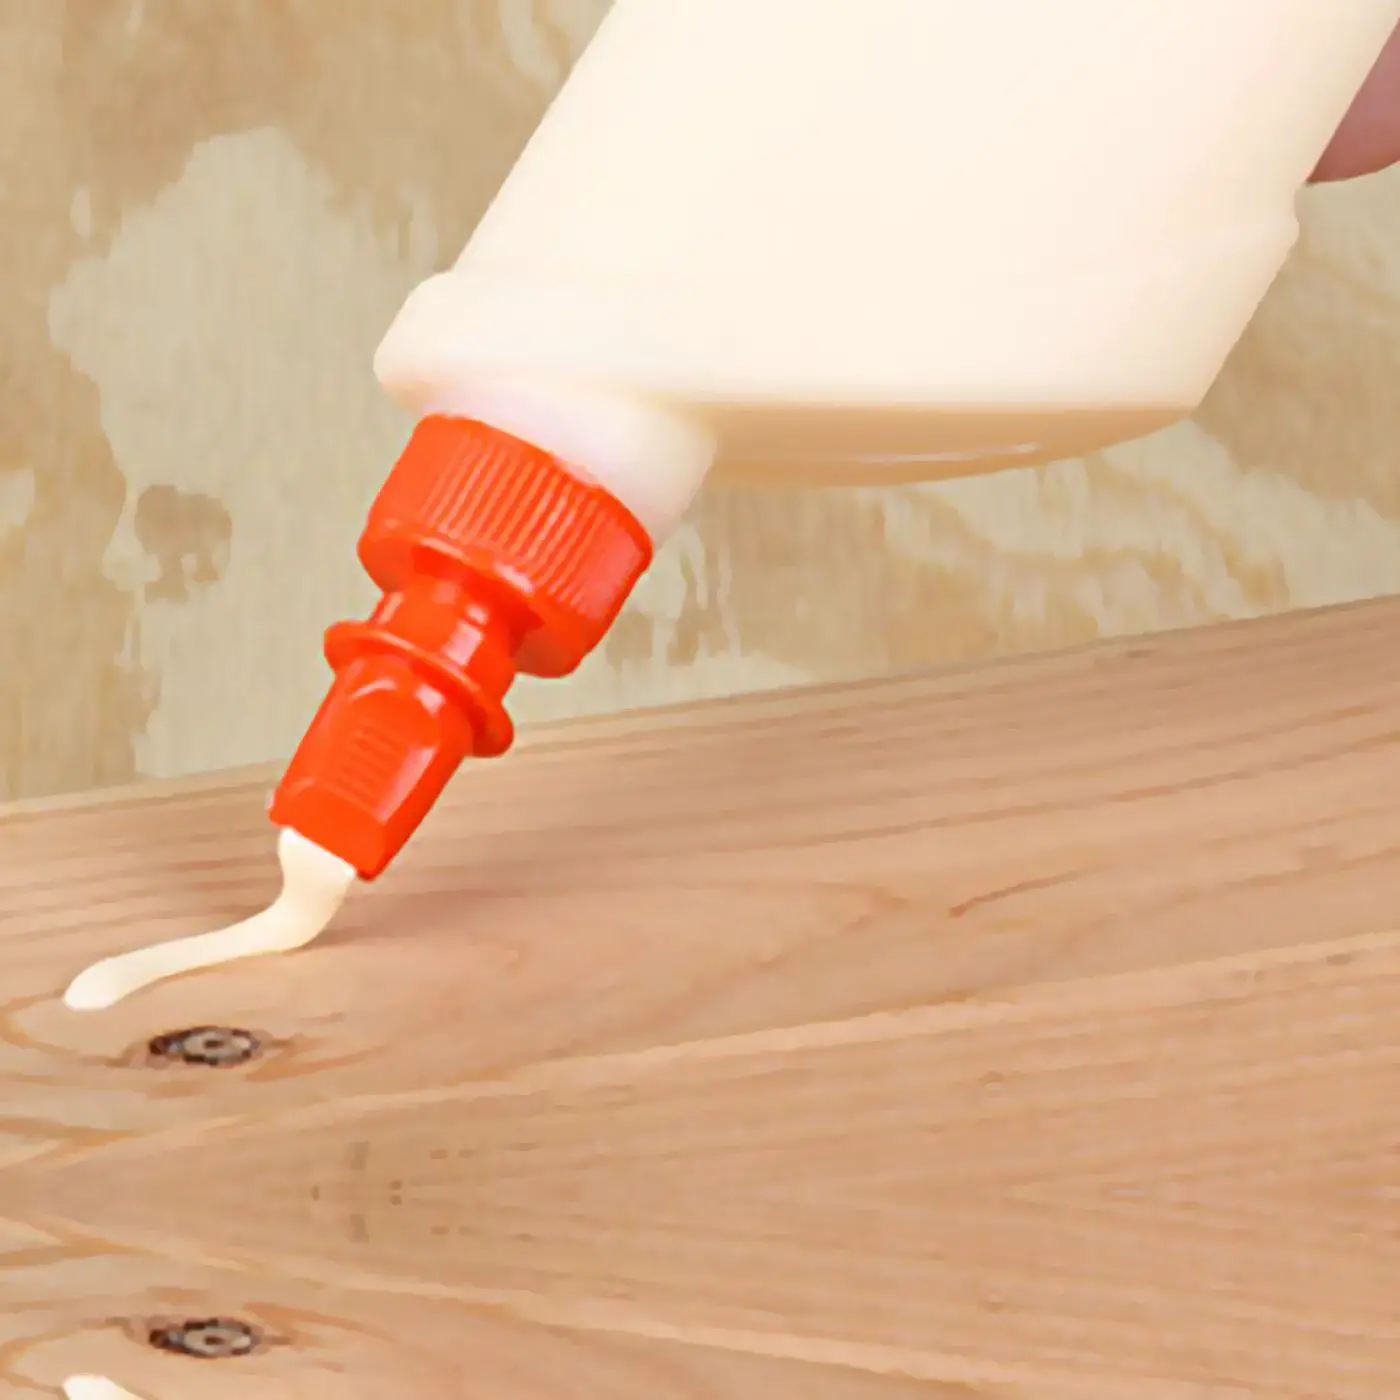 What Glue Do You Use To Stick Wood Together